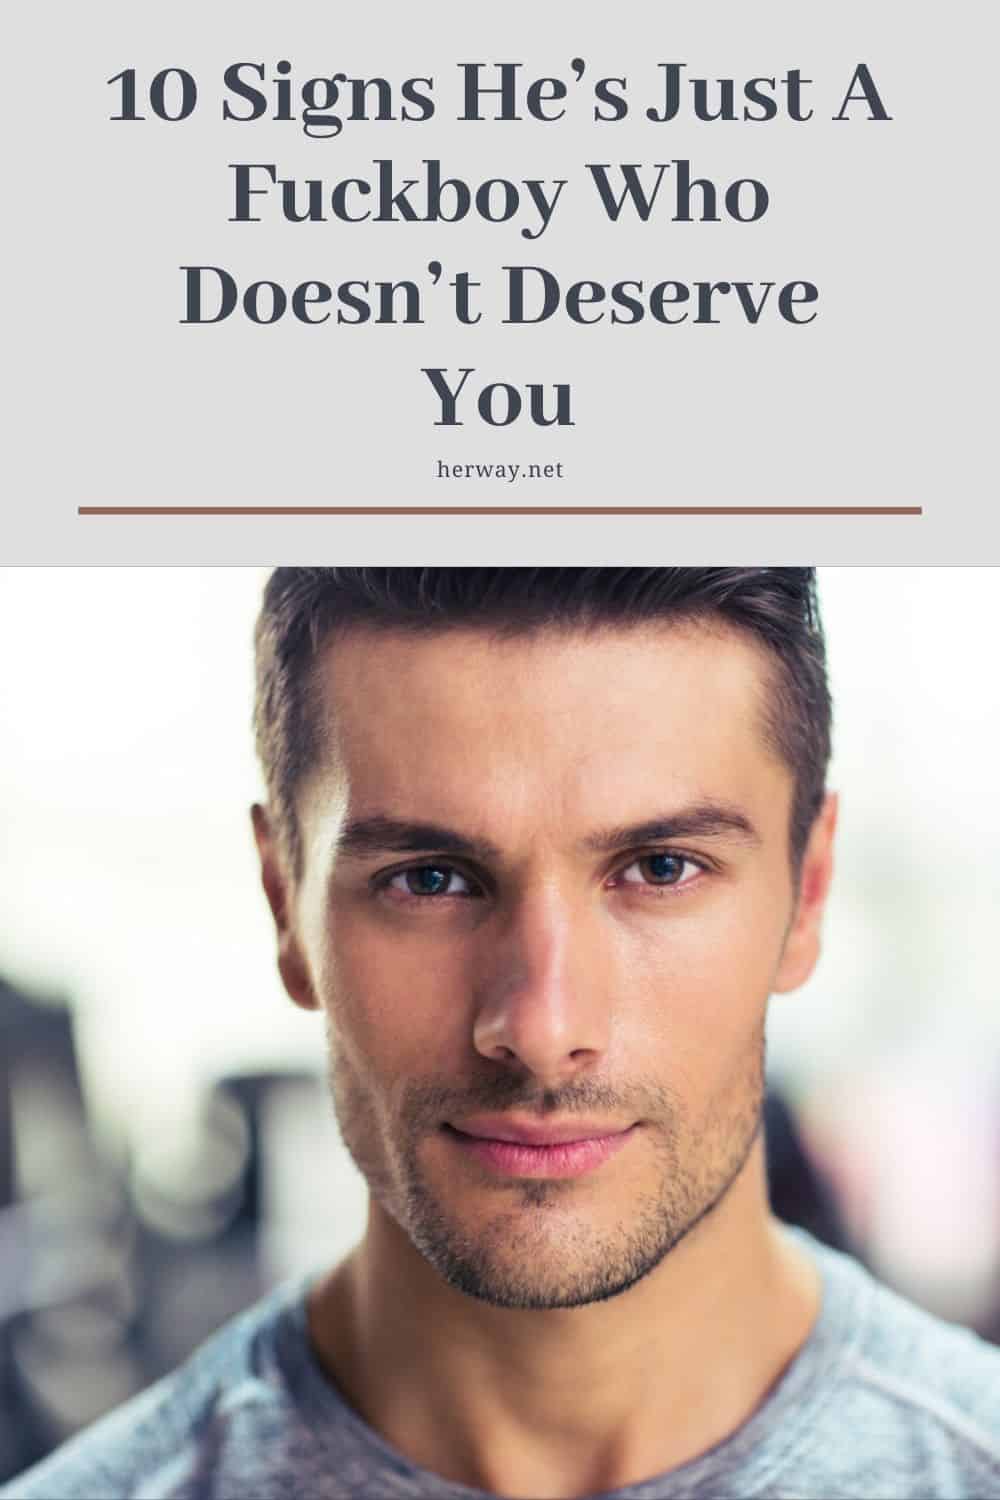 10 Signs He’s Just A Fuckboy Who Doesn’t Deserve You